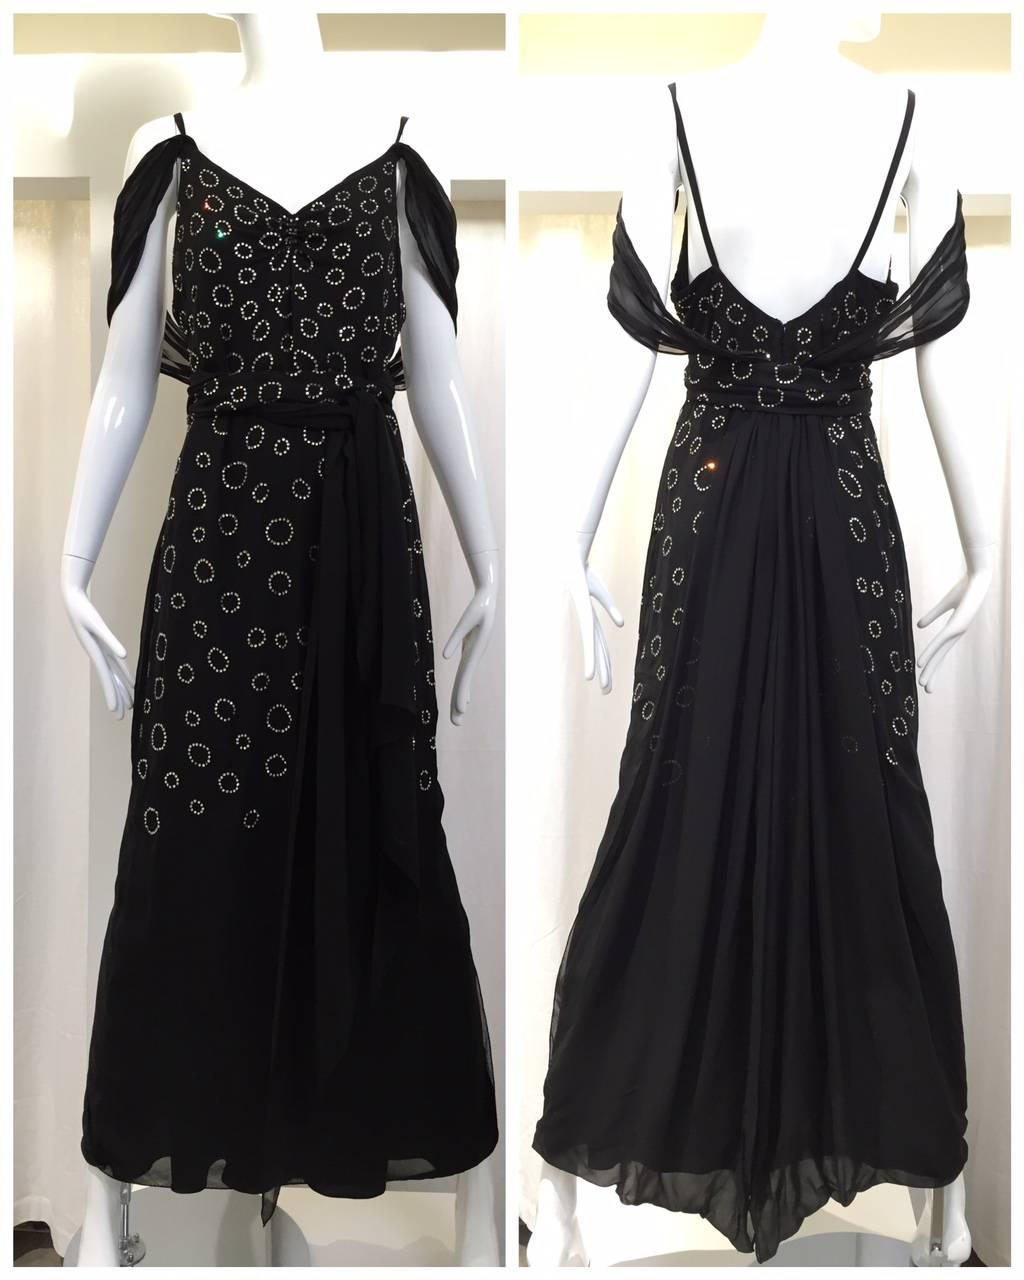 black and silver evening gowns